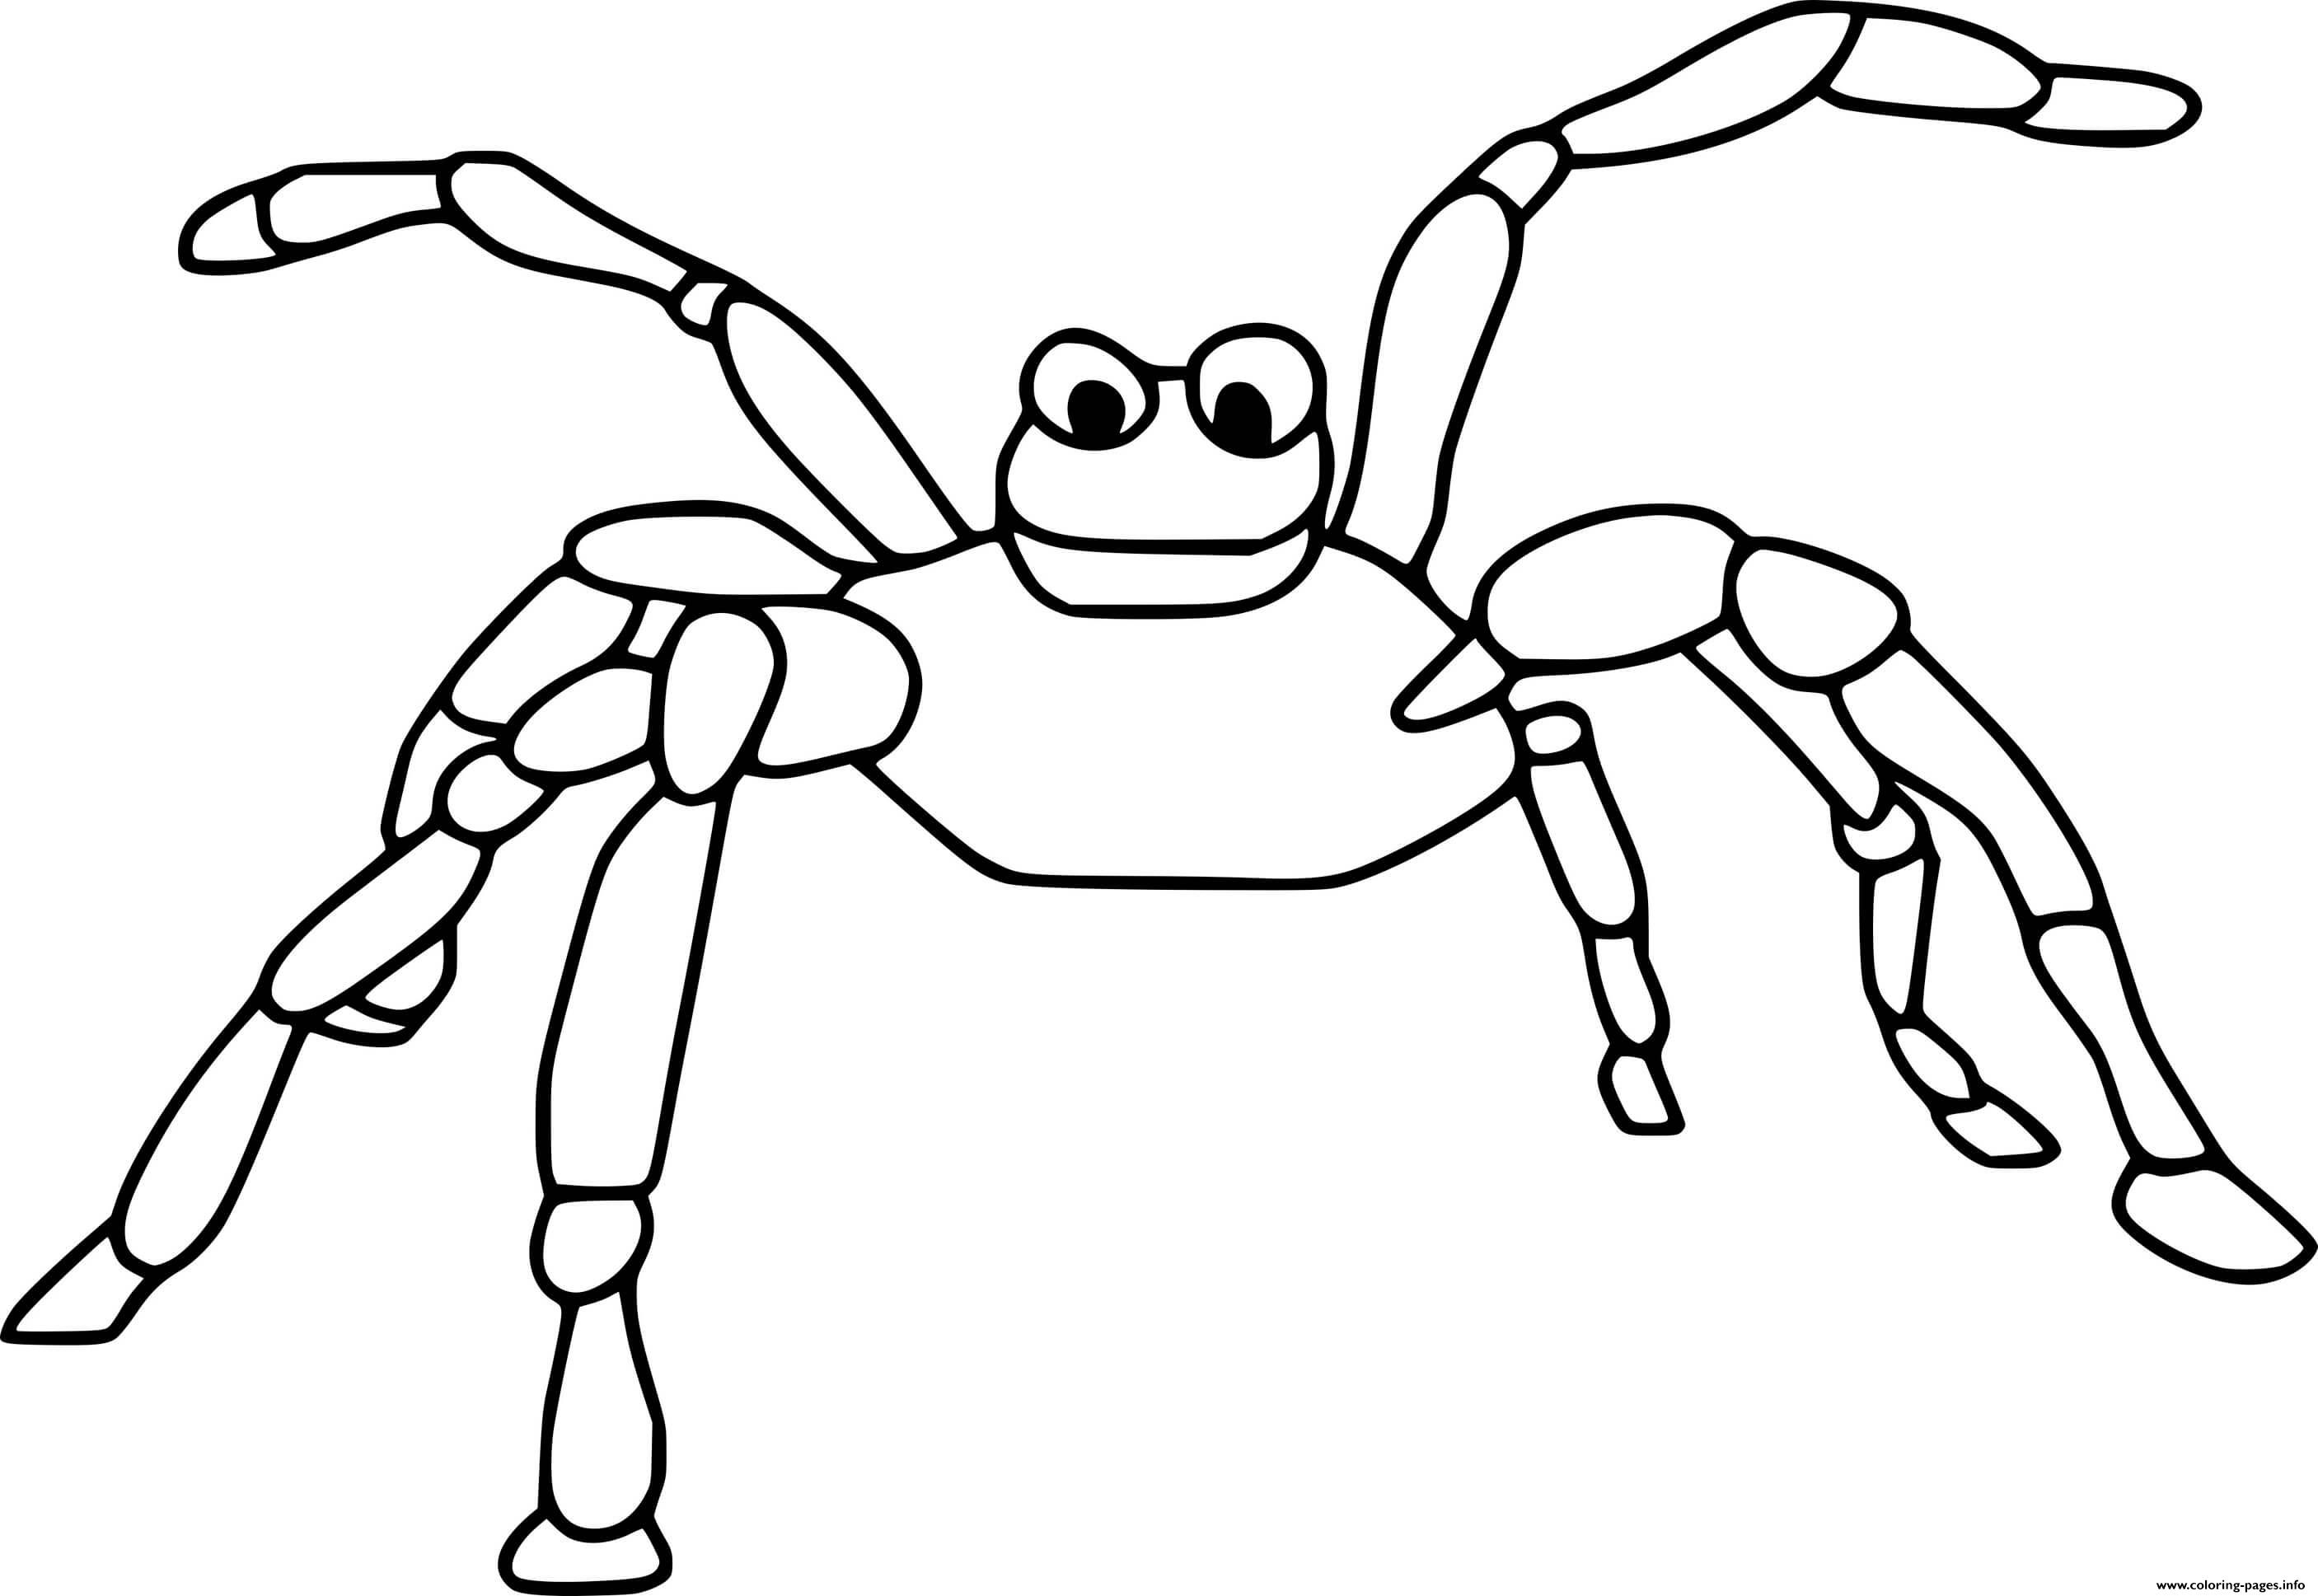 Cartoon Scary Spider coloring